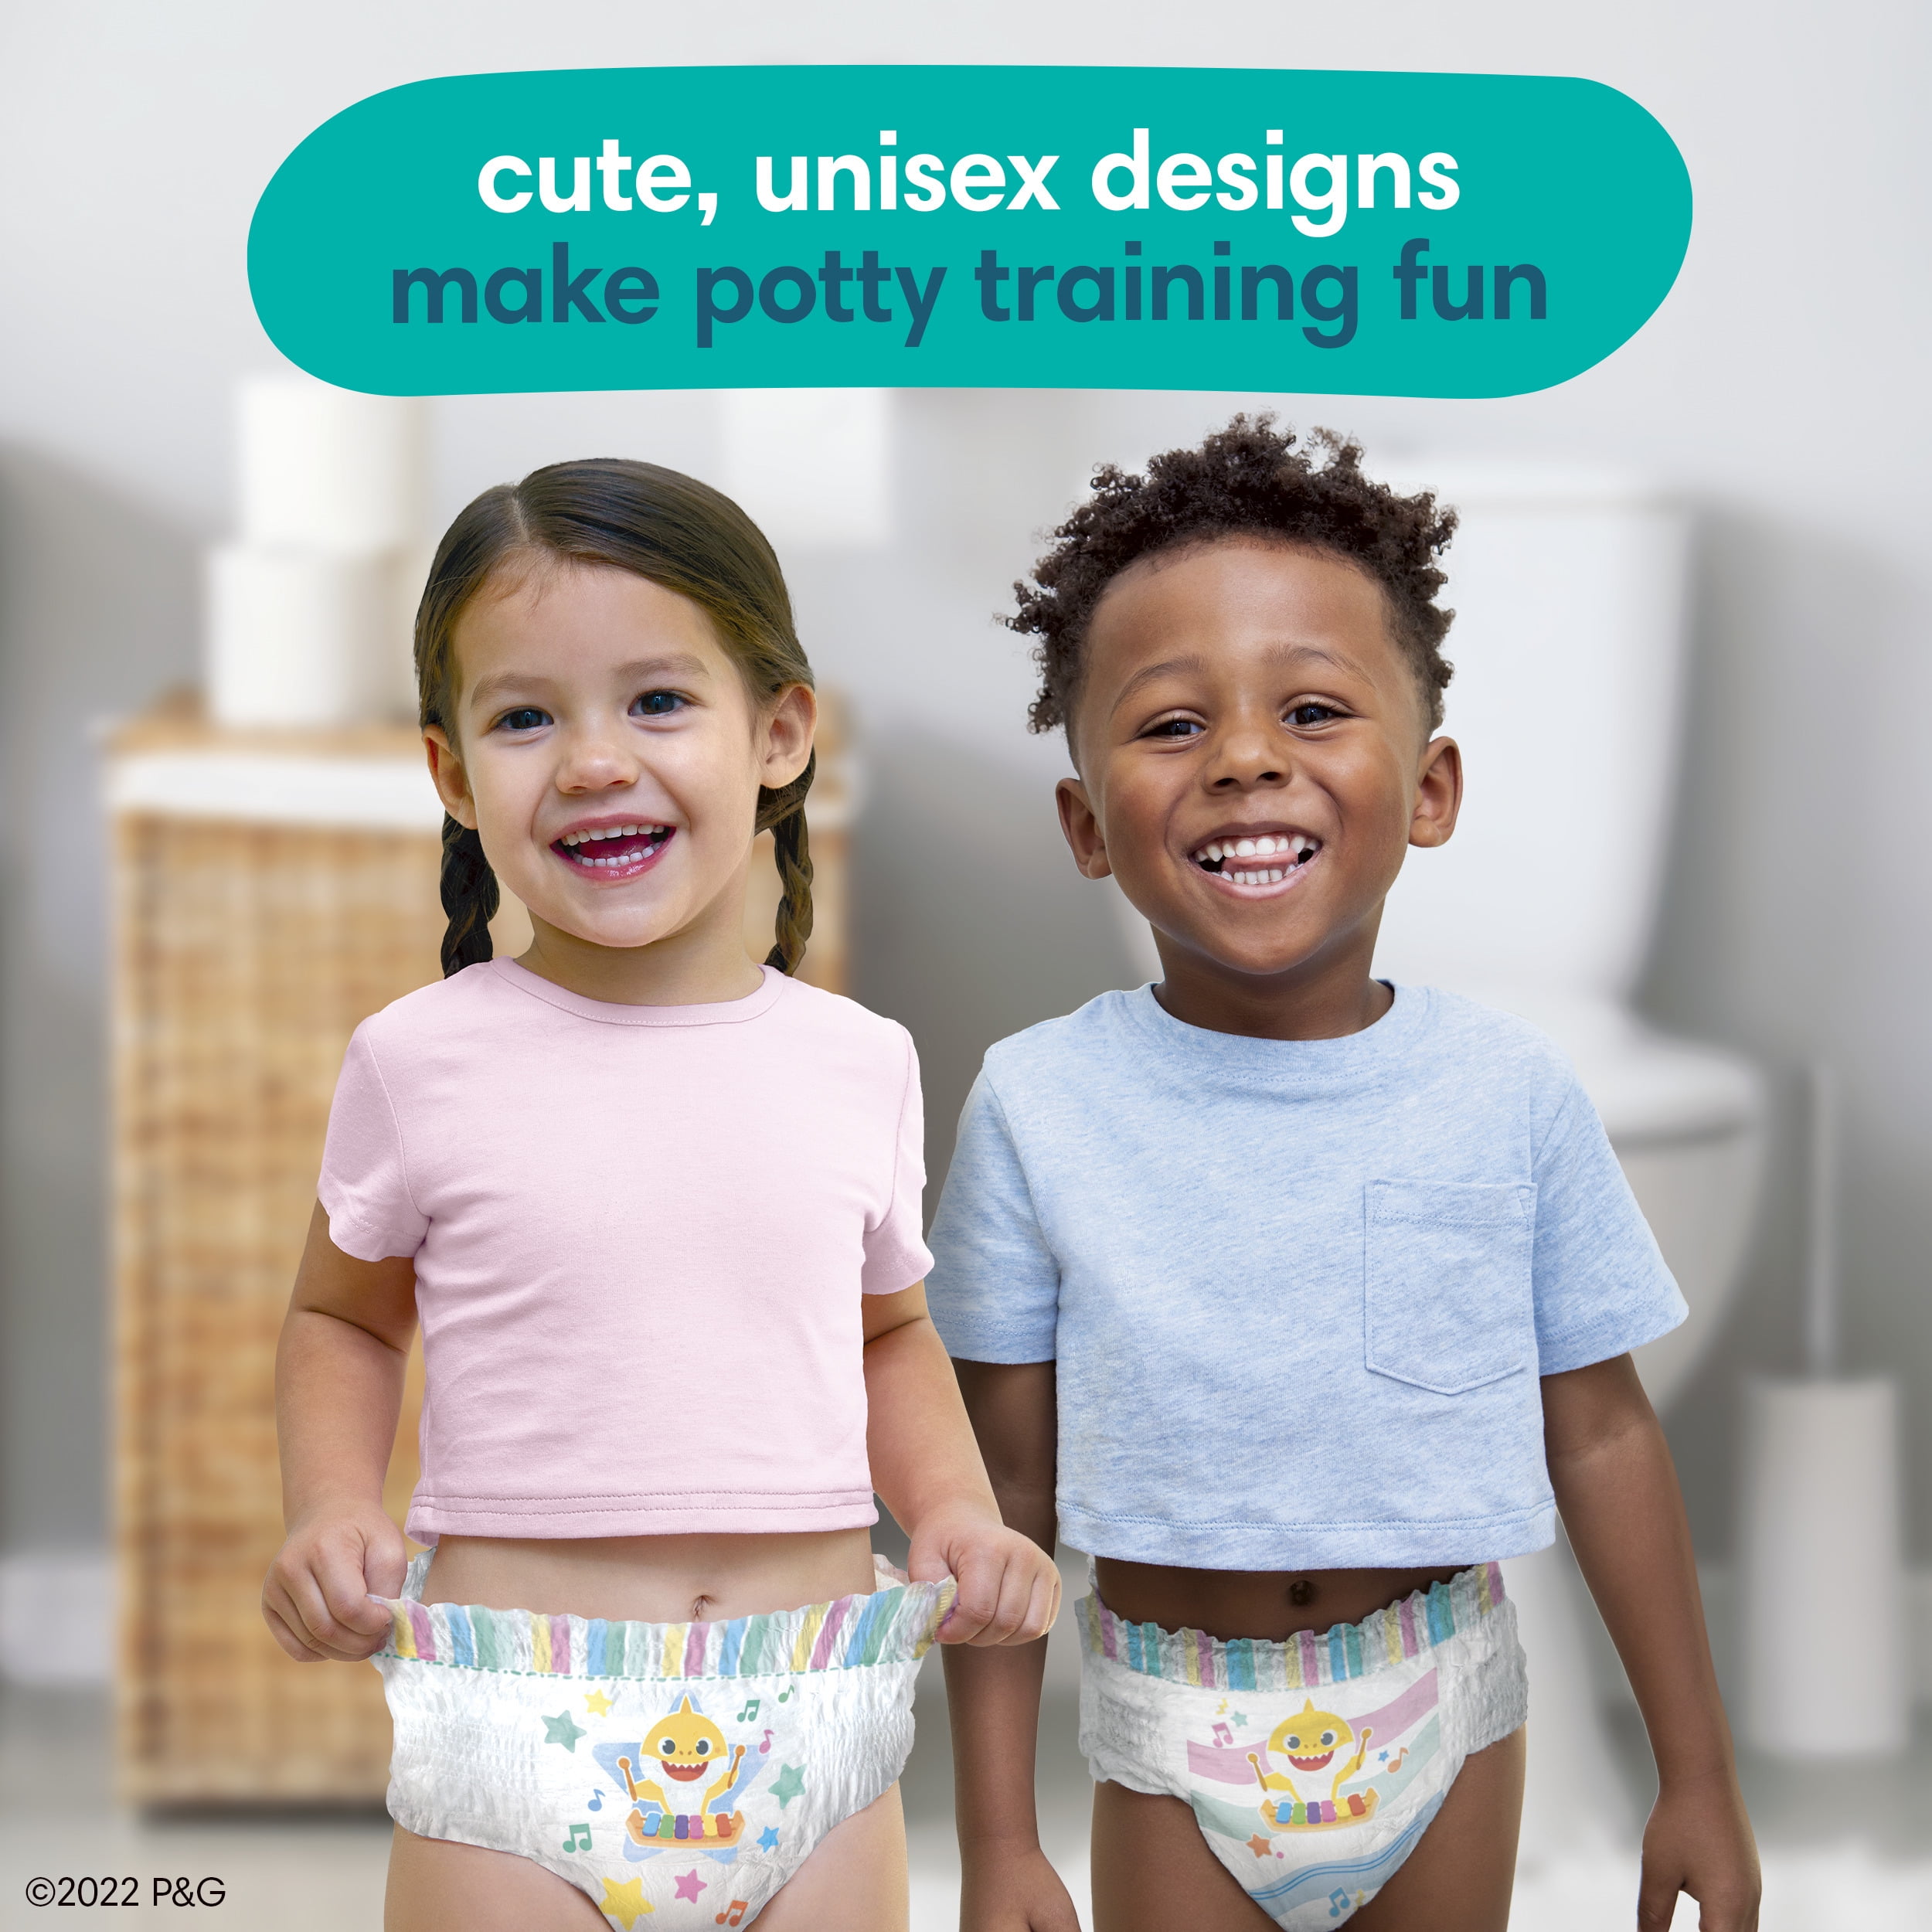 Pampers Pure Pants Baby Shark Toddler Training Pants 2T/3T, Unisex, 60 Ct  (Select for More Options)